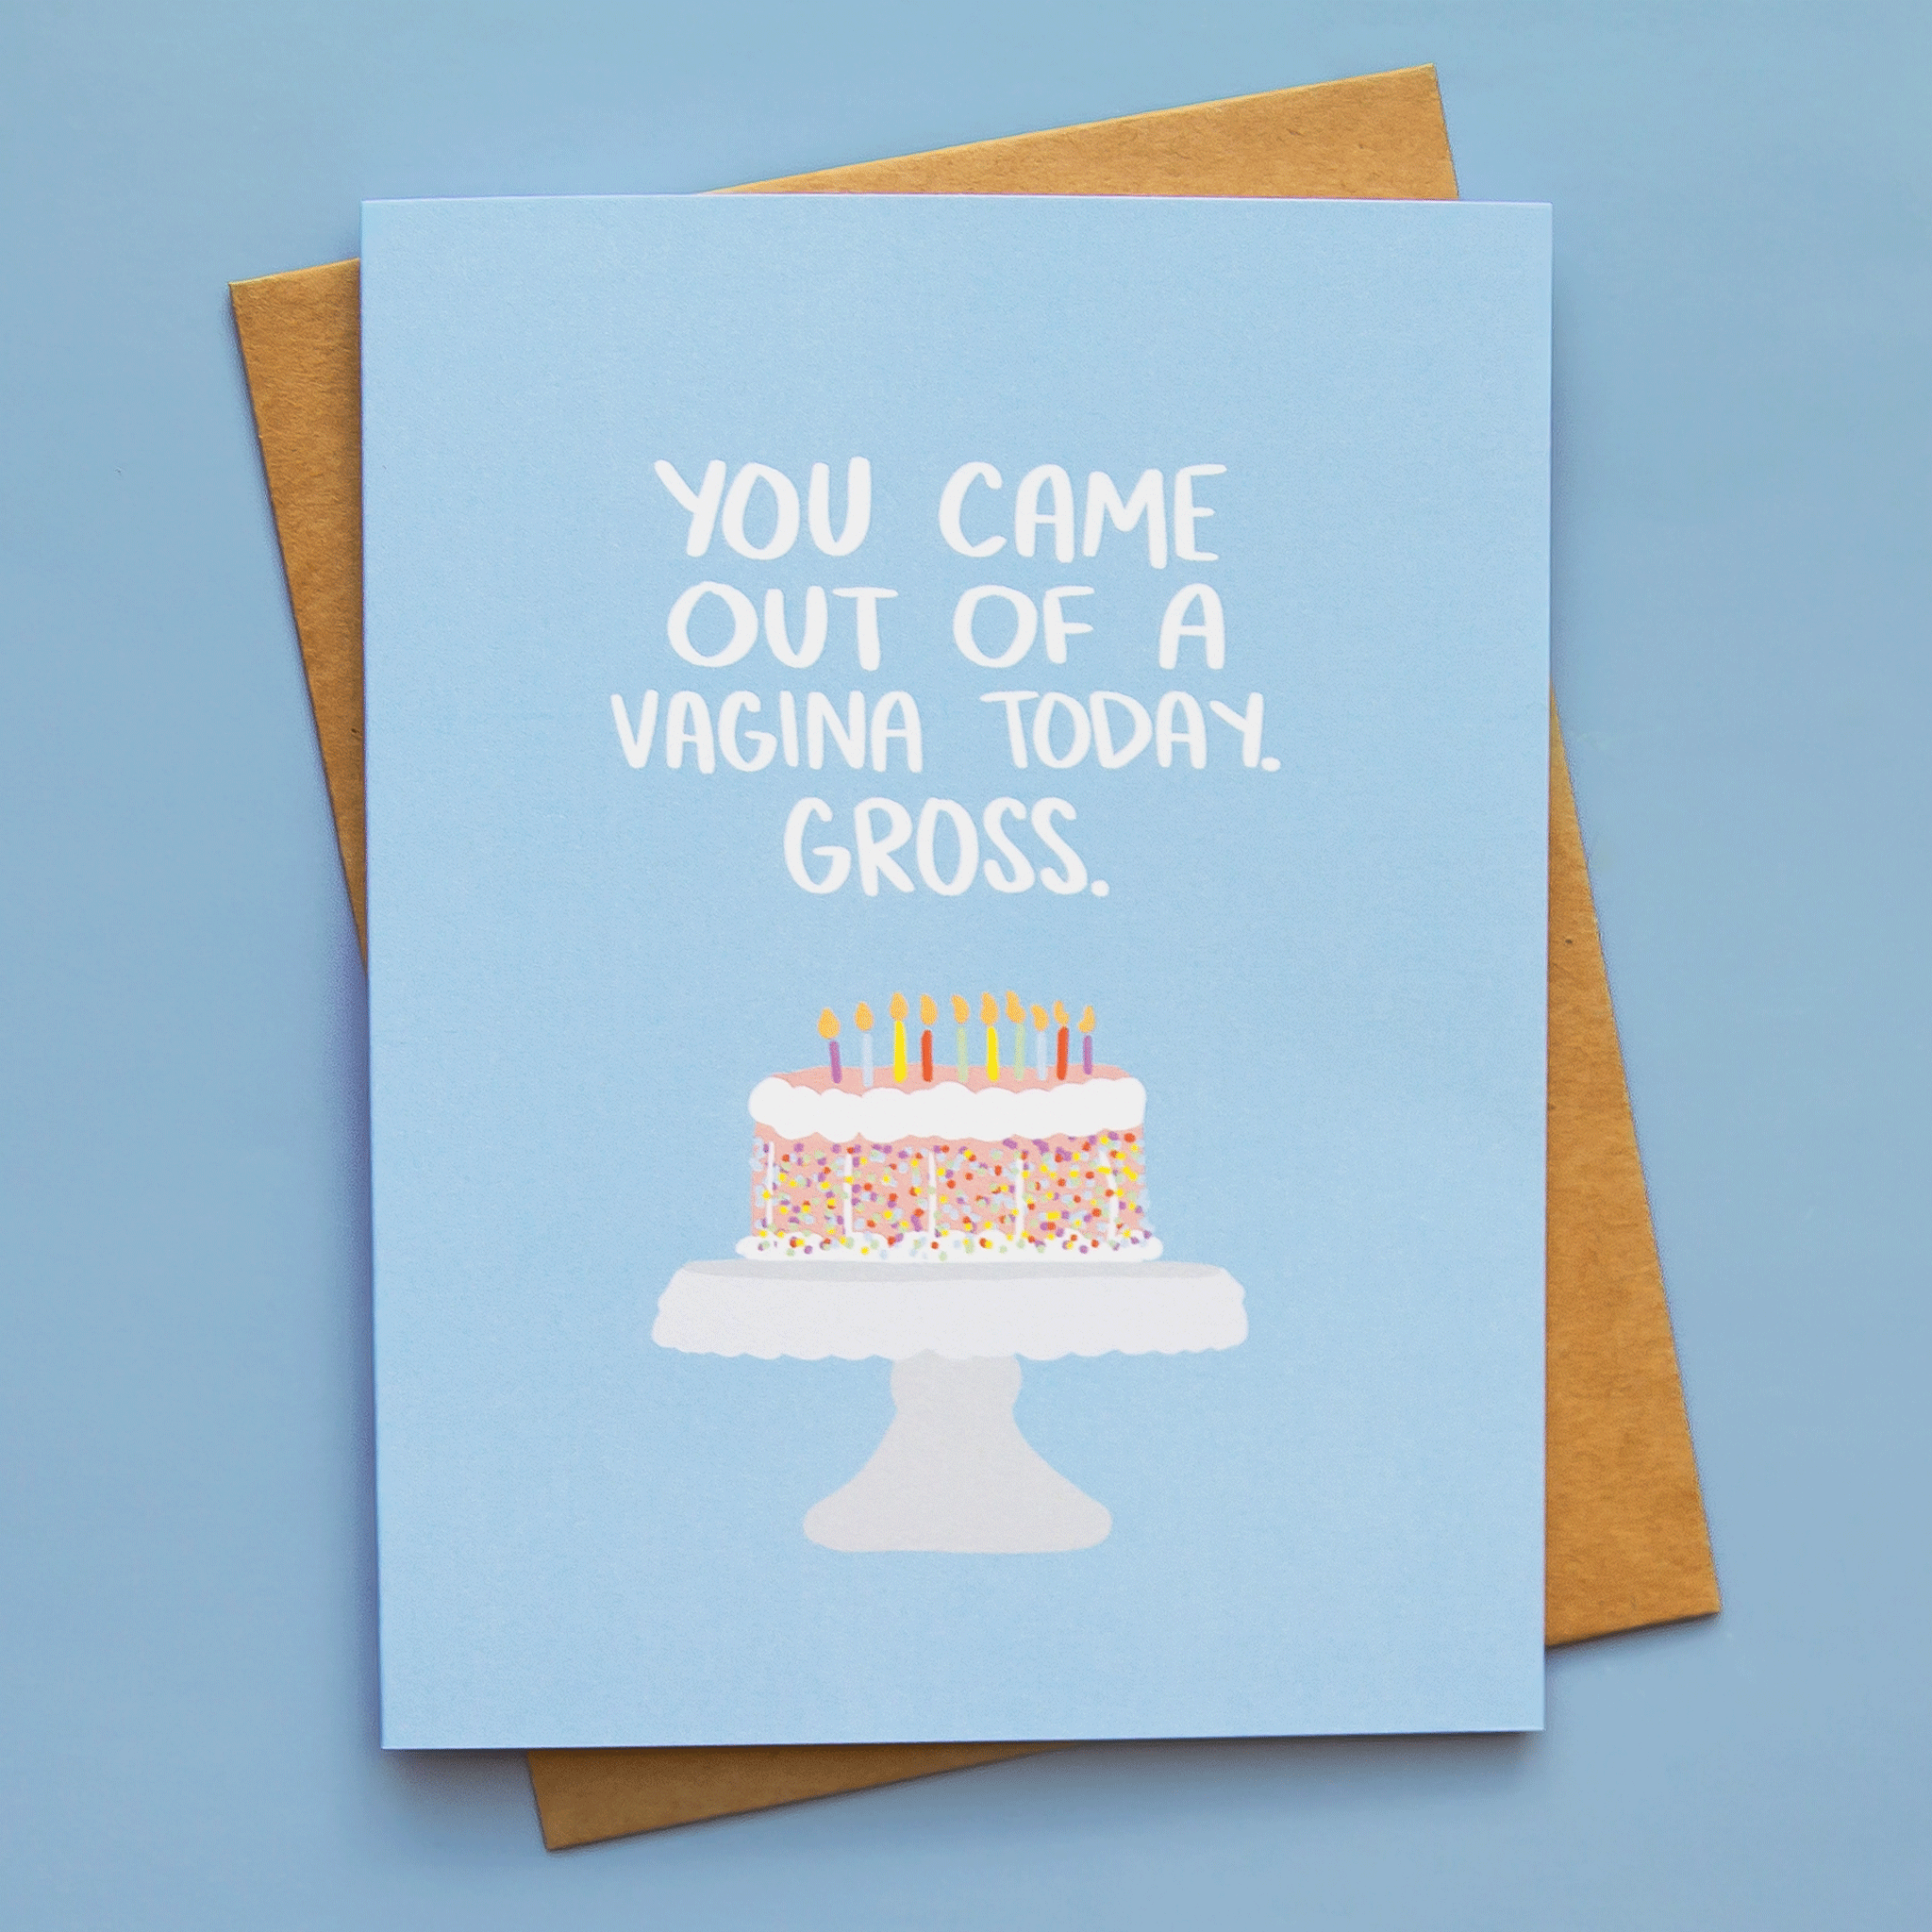 On a blue background is a blue card with white text that reads, "You Came Out Of A Vagina Today. Gross" along with an illustration of a multicolored birthday cake with candles.